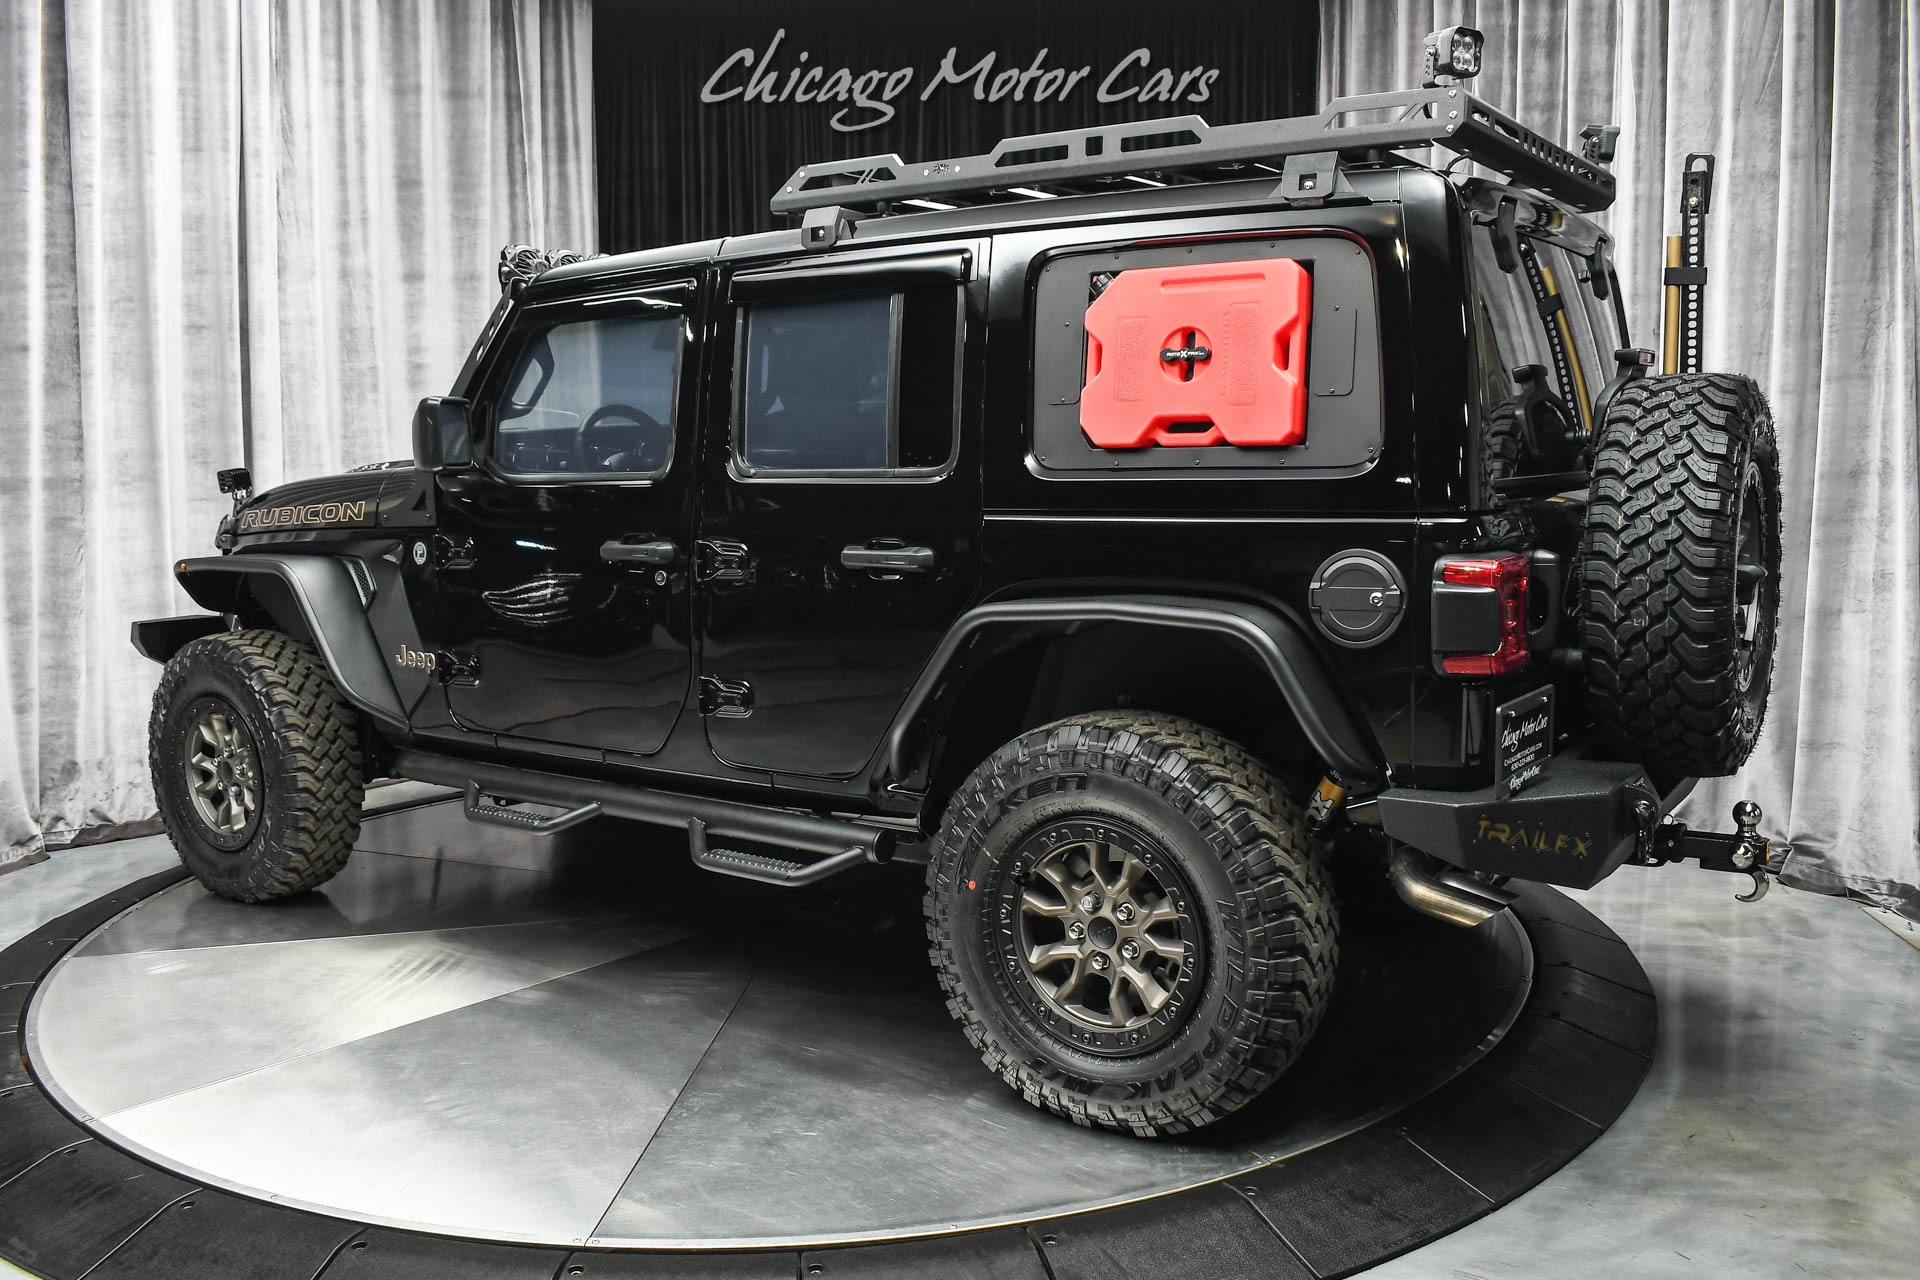 Used 2021 Jeep Wrangler Unlimited Rubicon 392 4x4 BULLET RESISTANT! Loaded  with Upgrades! Armored! For Sale ($189,800) | Midwest Truck Group Stock  #MW732929-MK